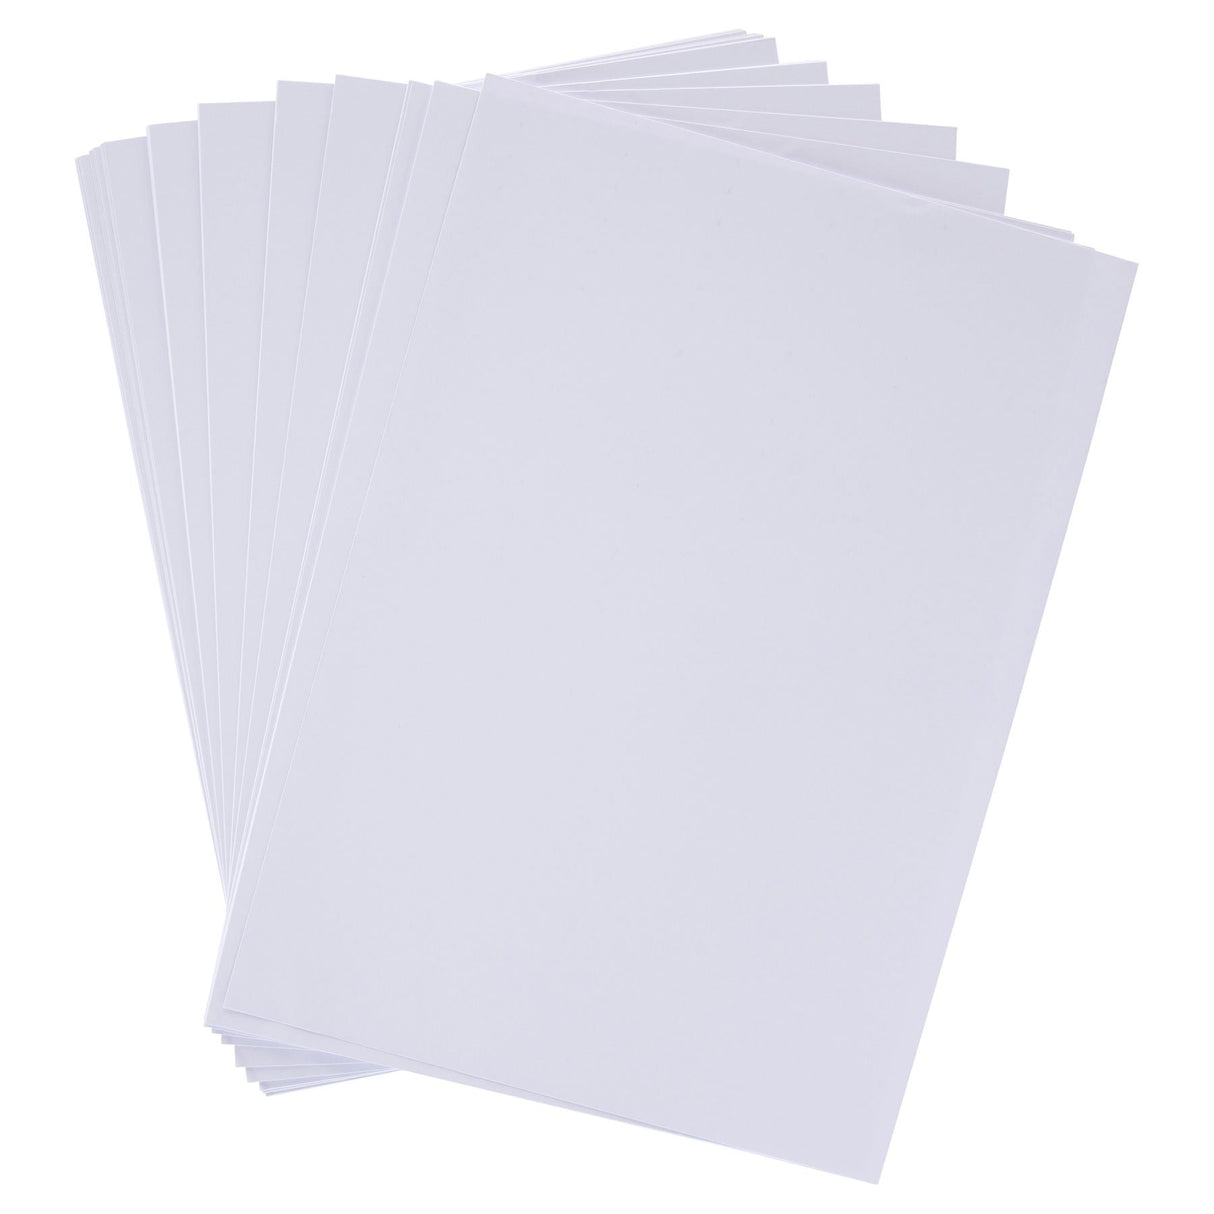 Premier Activity A3 Card - 160gsm - White - 50 Sheets | Stationery Shop UK